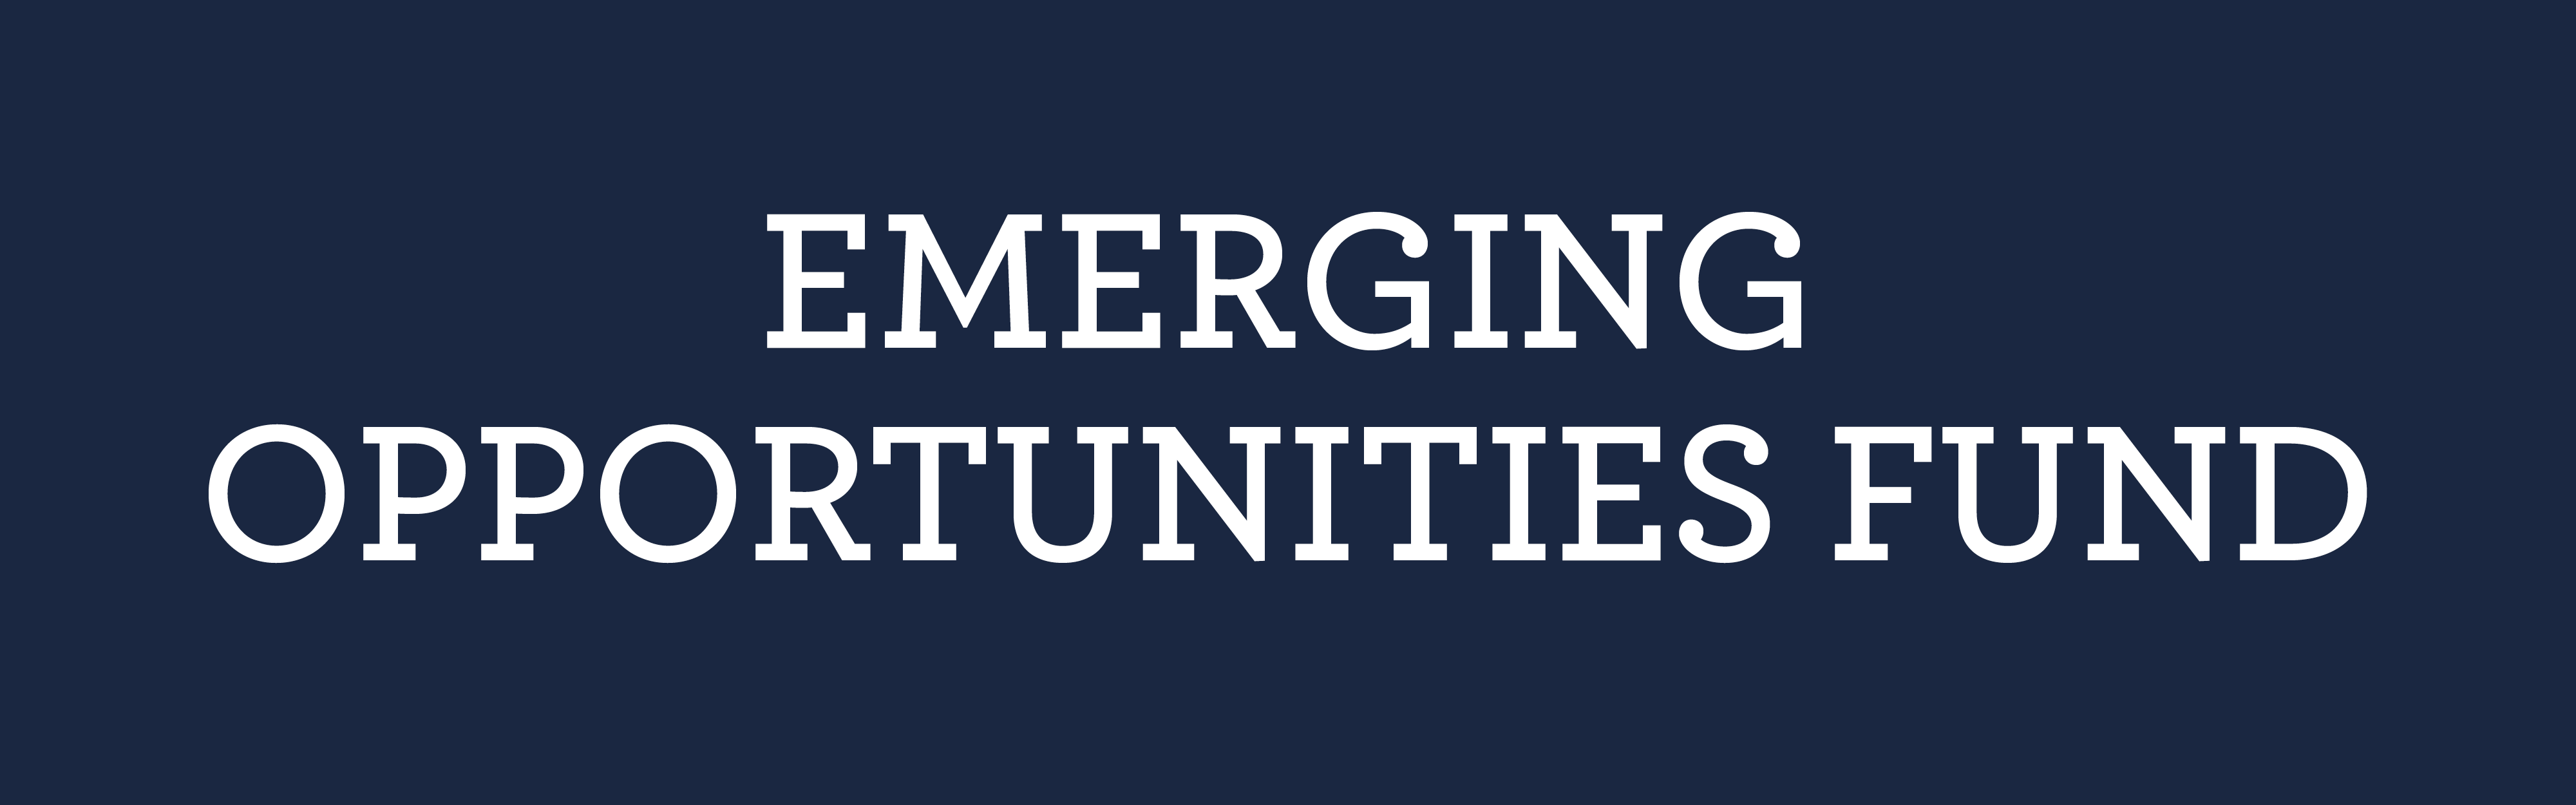 Emerging Opportunities Fund